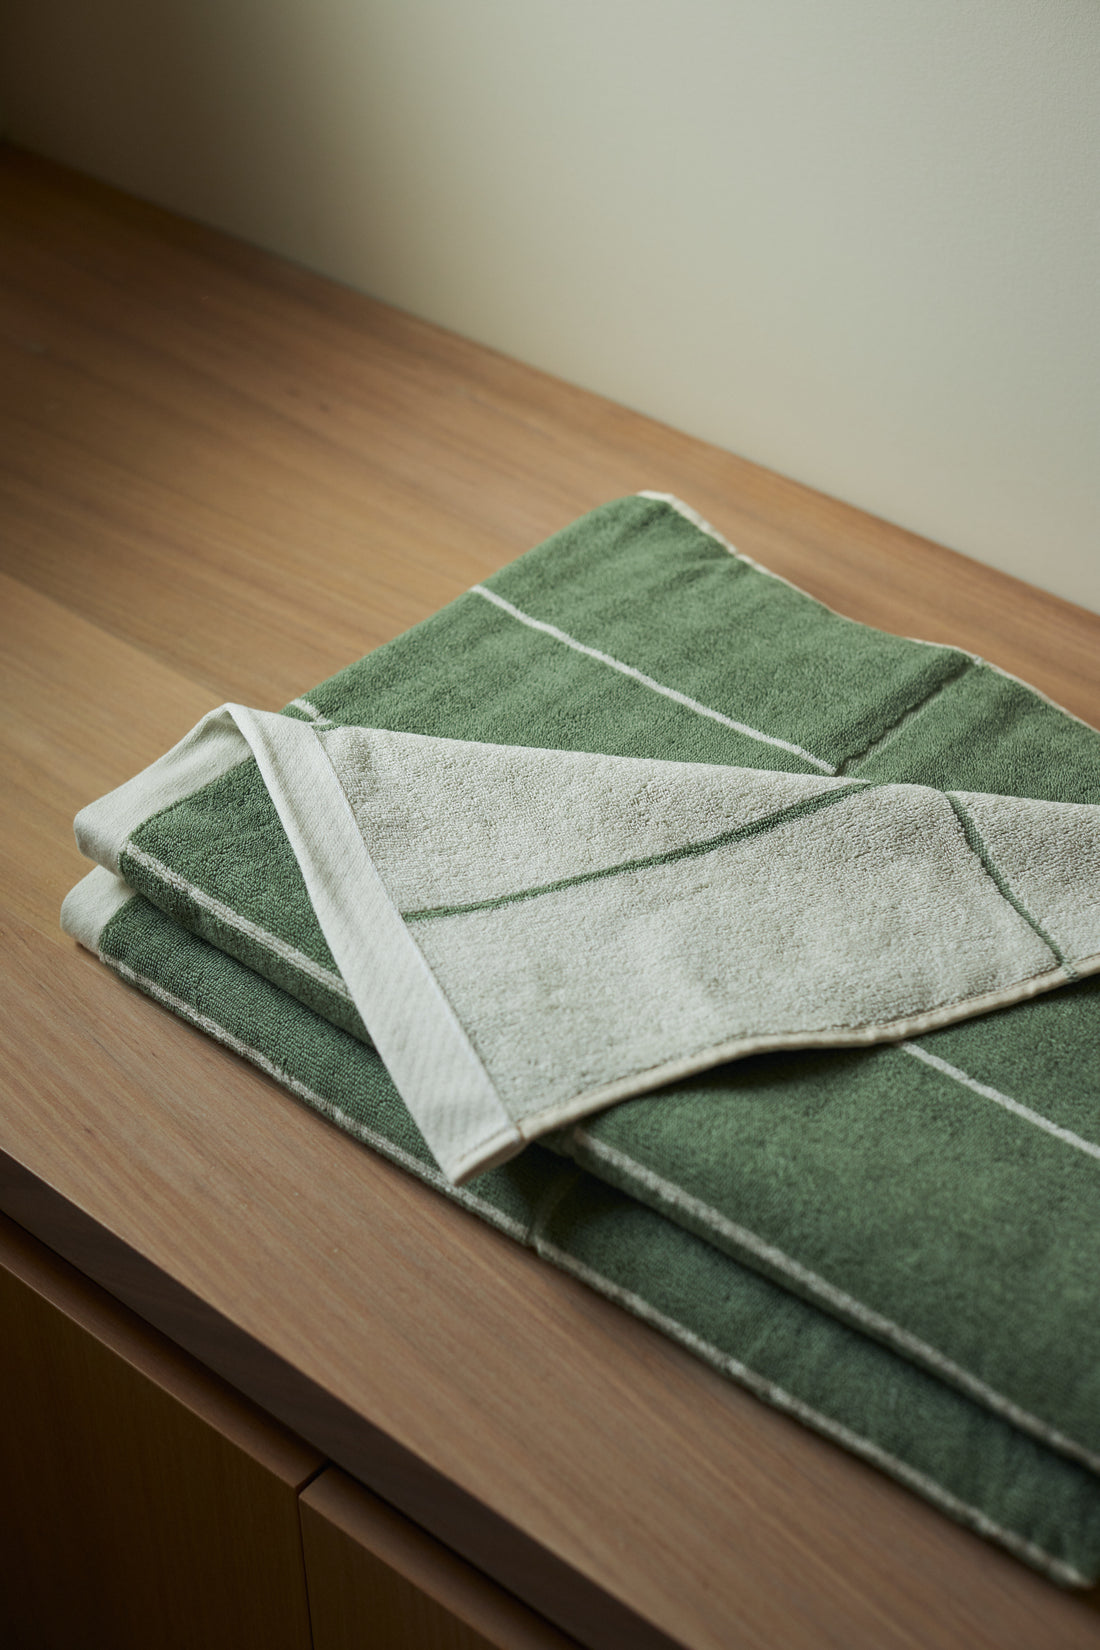 BAINA Bethell Bath Towel - Sage / Chalk | The Source - Leader in Luxury Kitchen & Bathroom Products in Adelaide, Australia